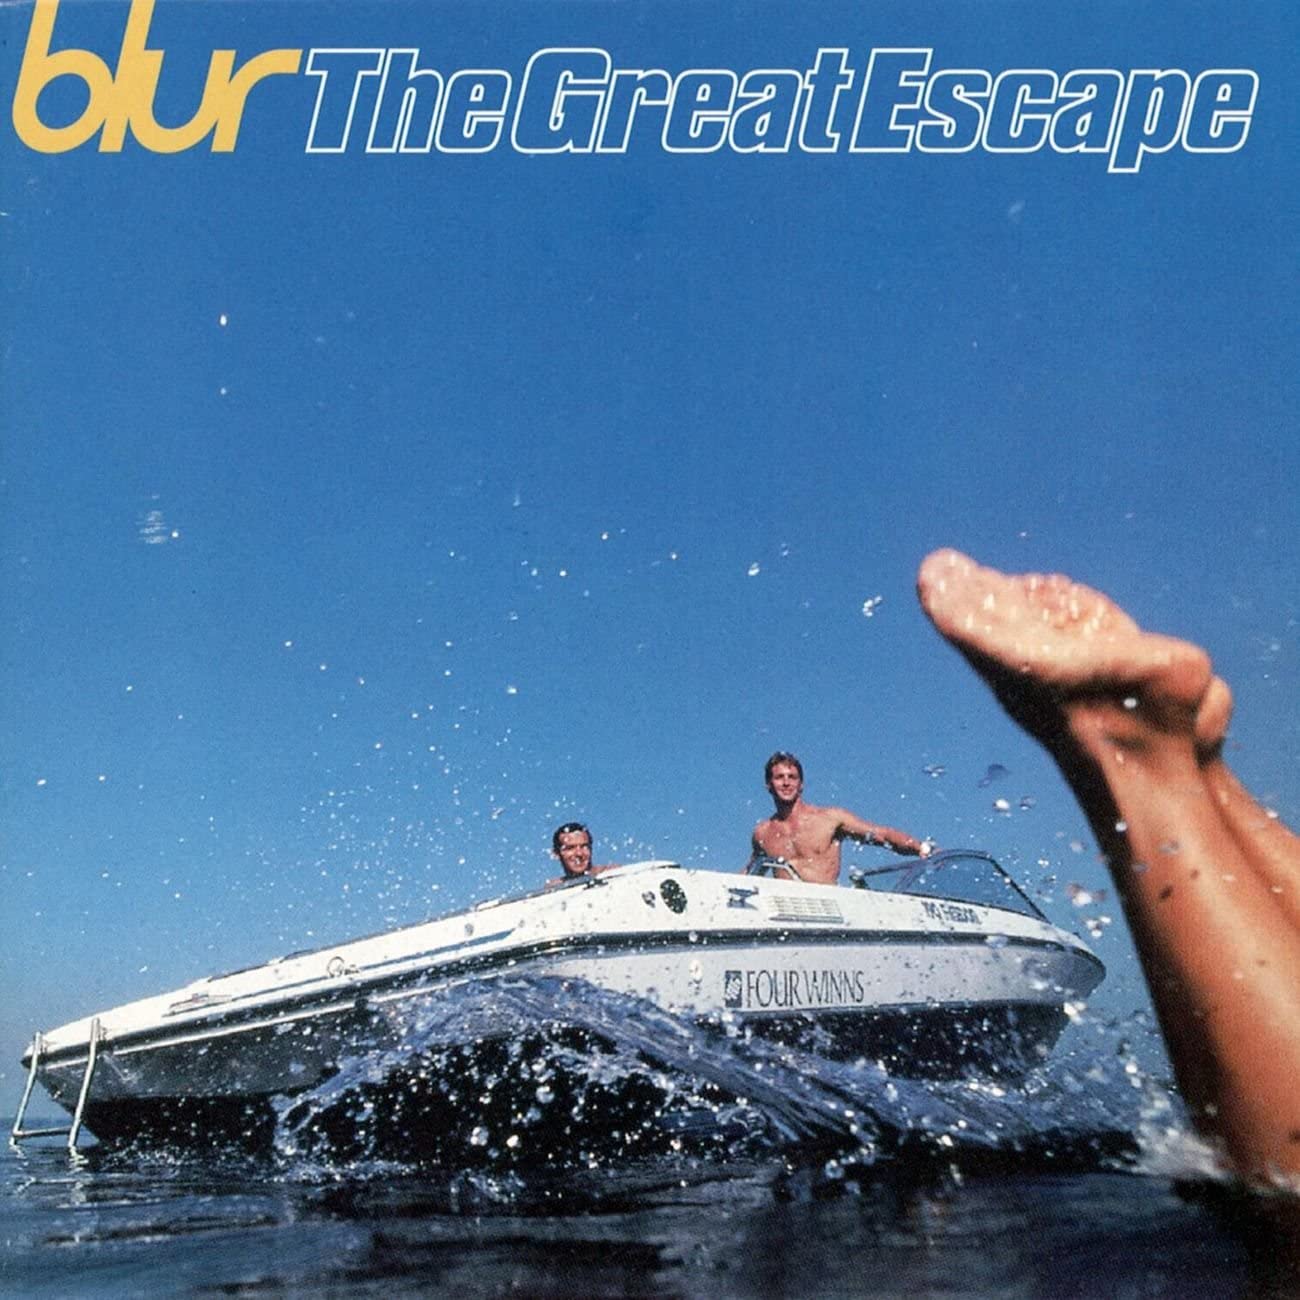 4th album on Vinyl from Blur, The Great Escape was originally released in 1995 and was the first Blur album to crack the US charts